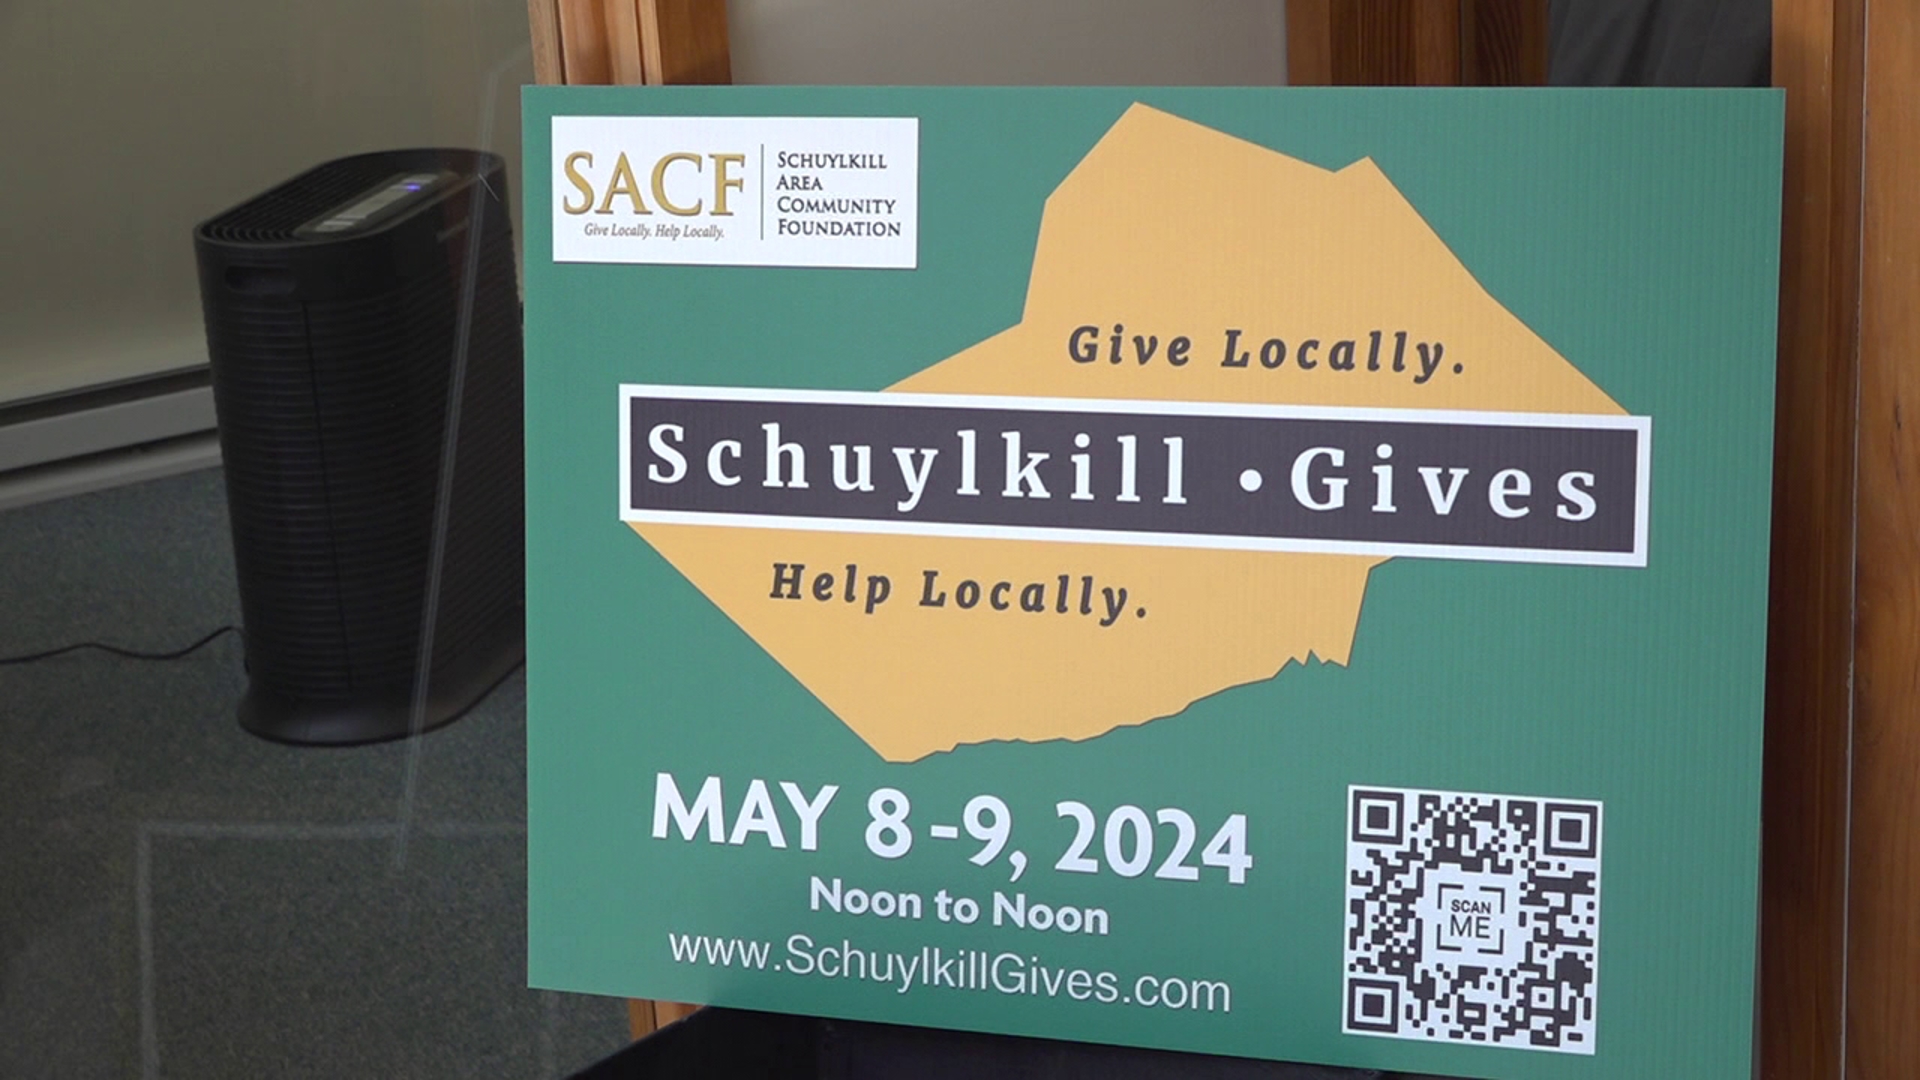 More than two dozen nonprofit organizations around Schuylkill County are hoping to get a financial boost from the online fundraiser.